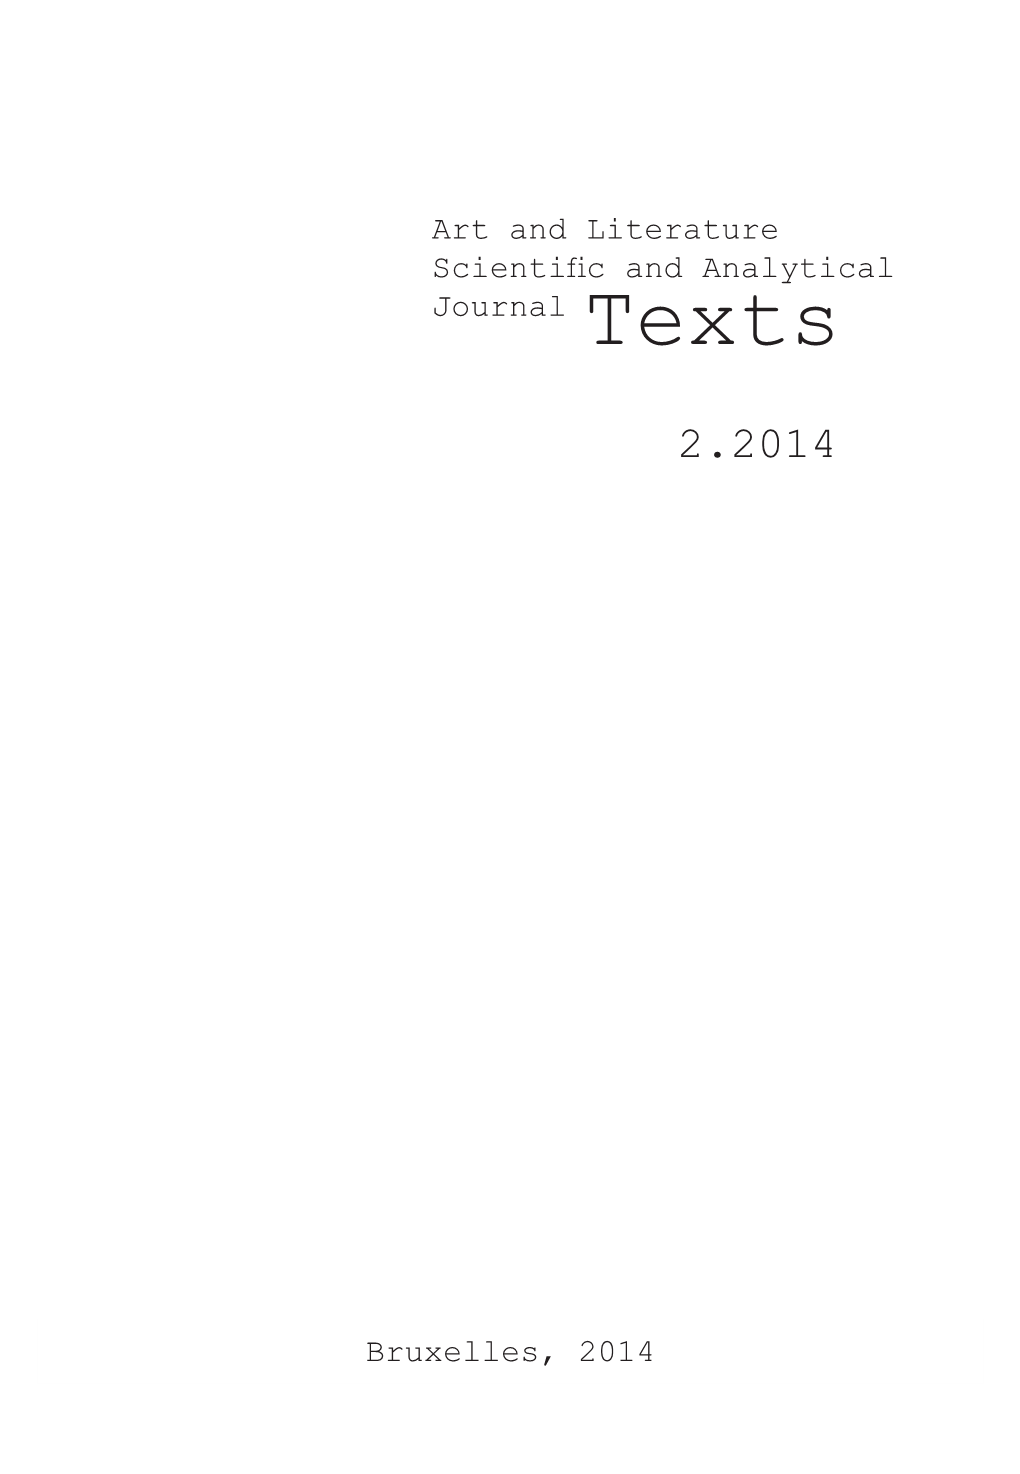 Bruxelles, 2014 Art and Literature Scientific and Analytical Journal